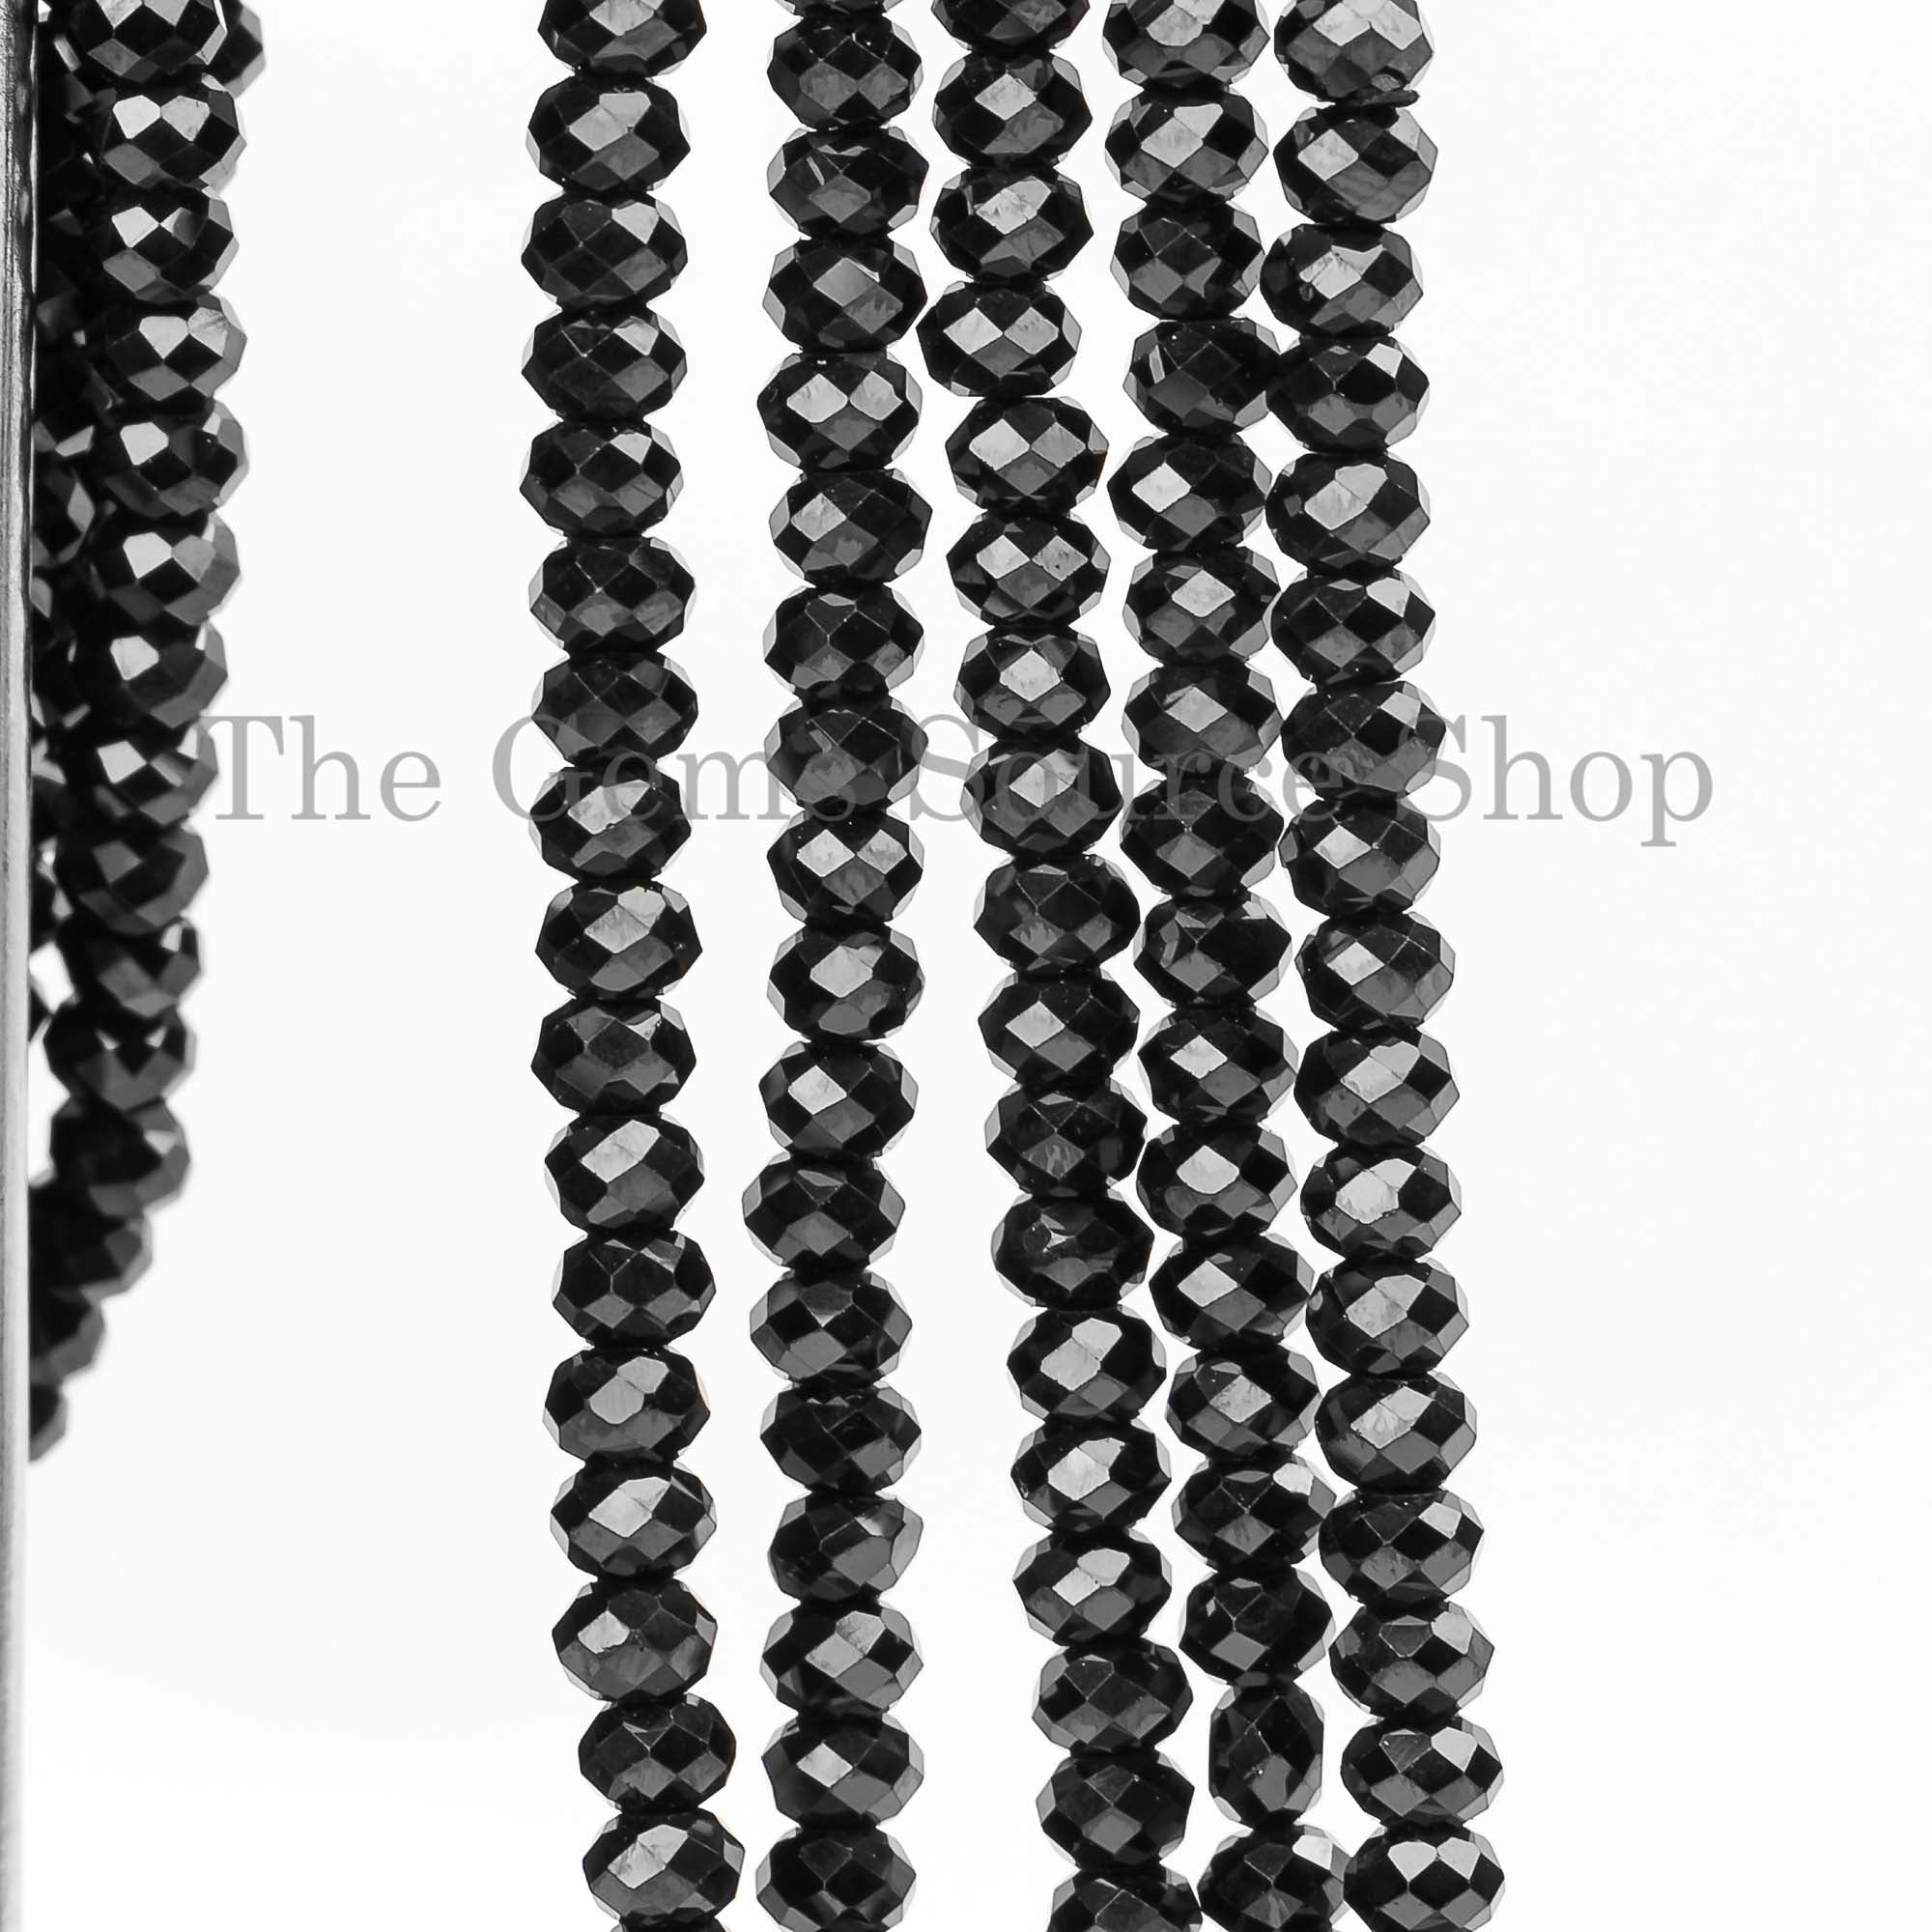 Black Spinel Beads, Black Spinel Faceted Beads, Black Spinel Rondelle Shape Beads, Wholesale Beads